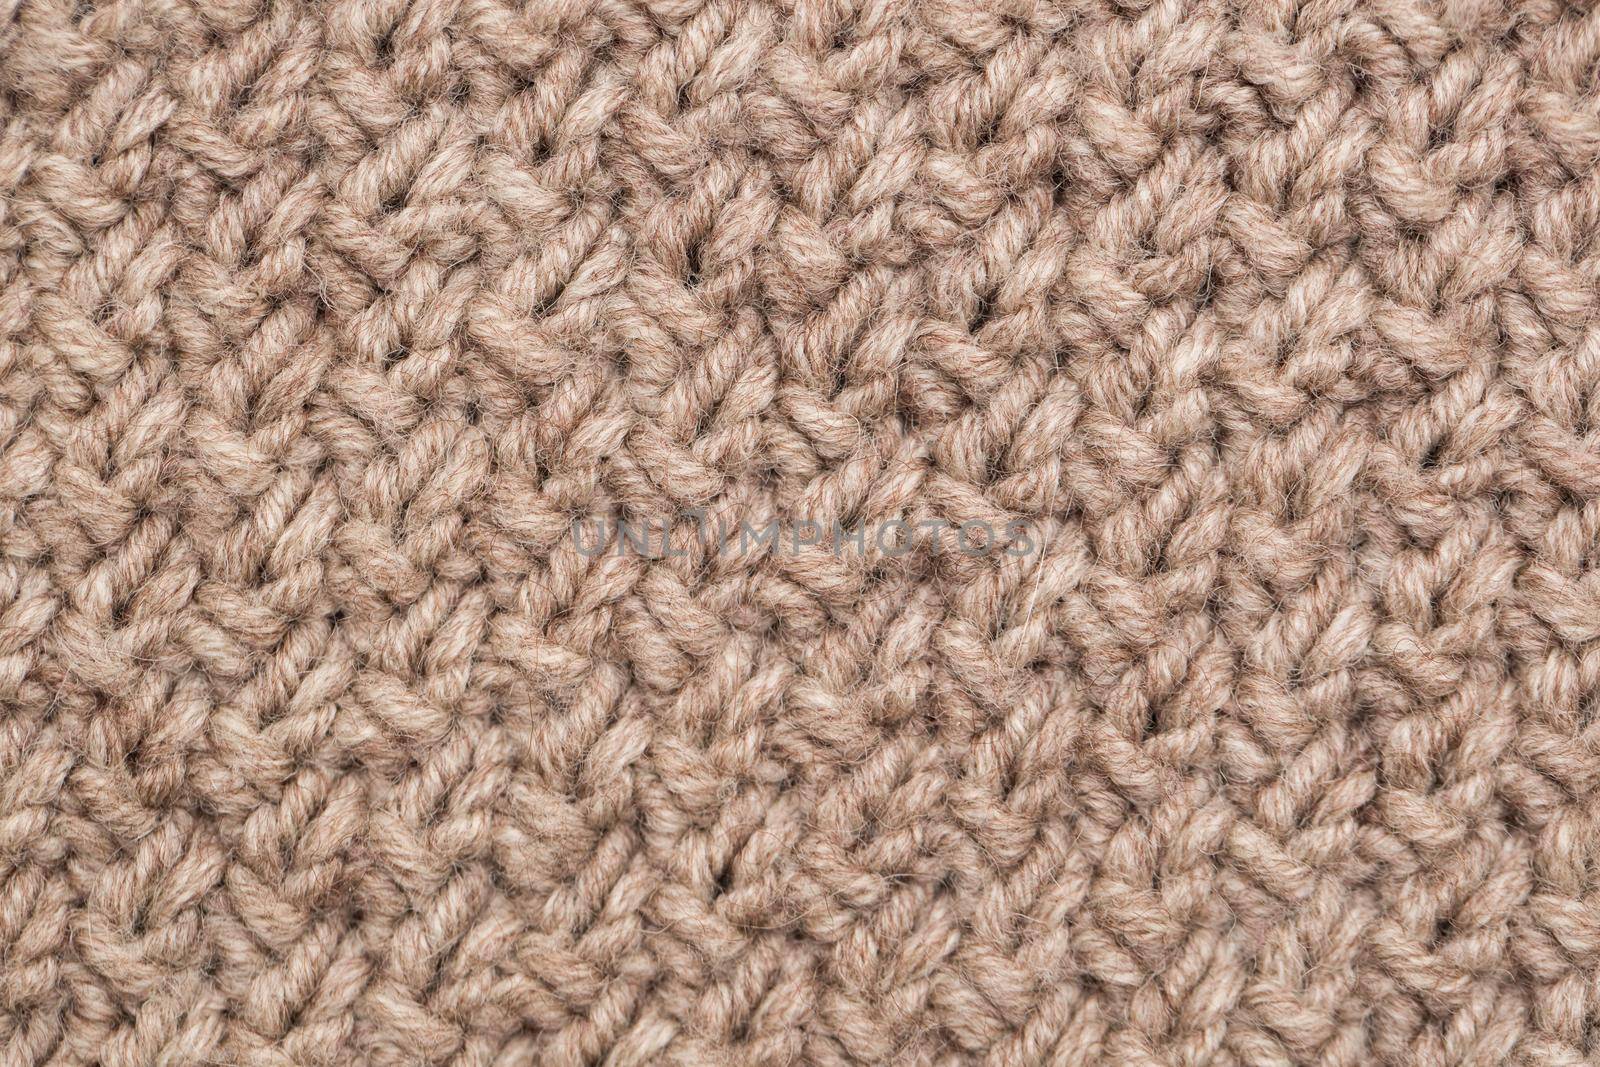 knitted fabric background texture white by StudioPeace